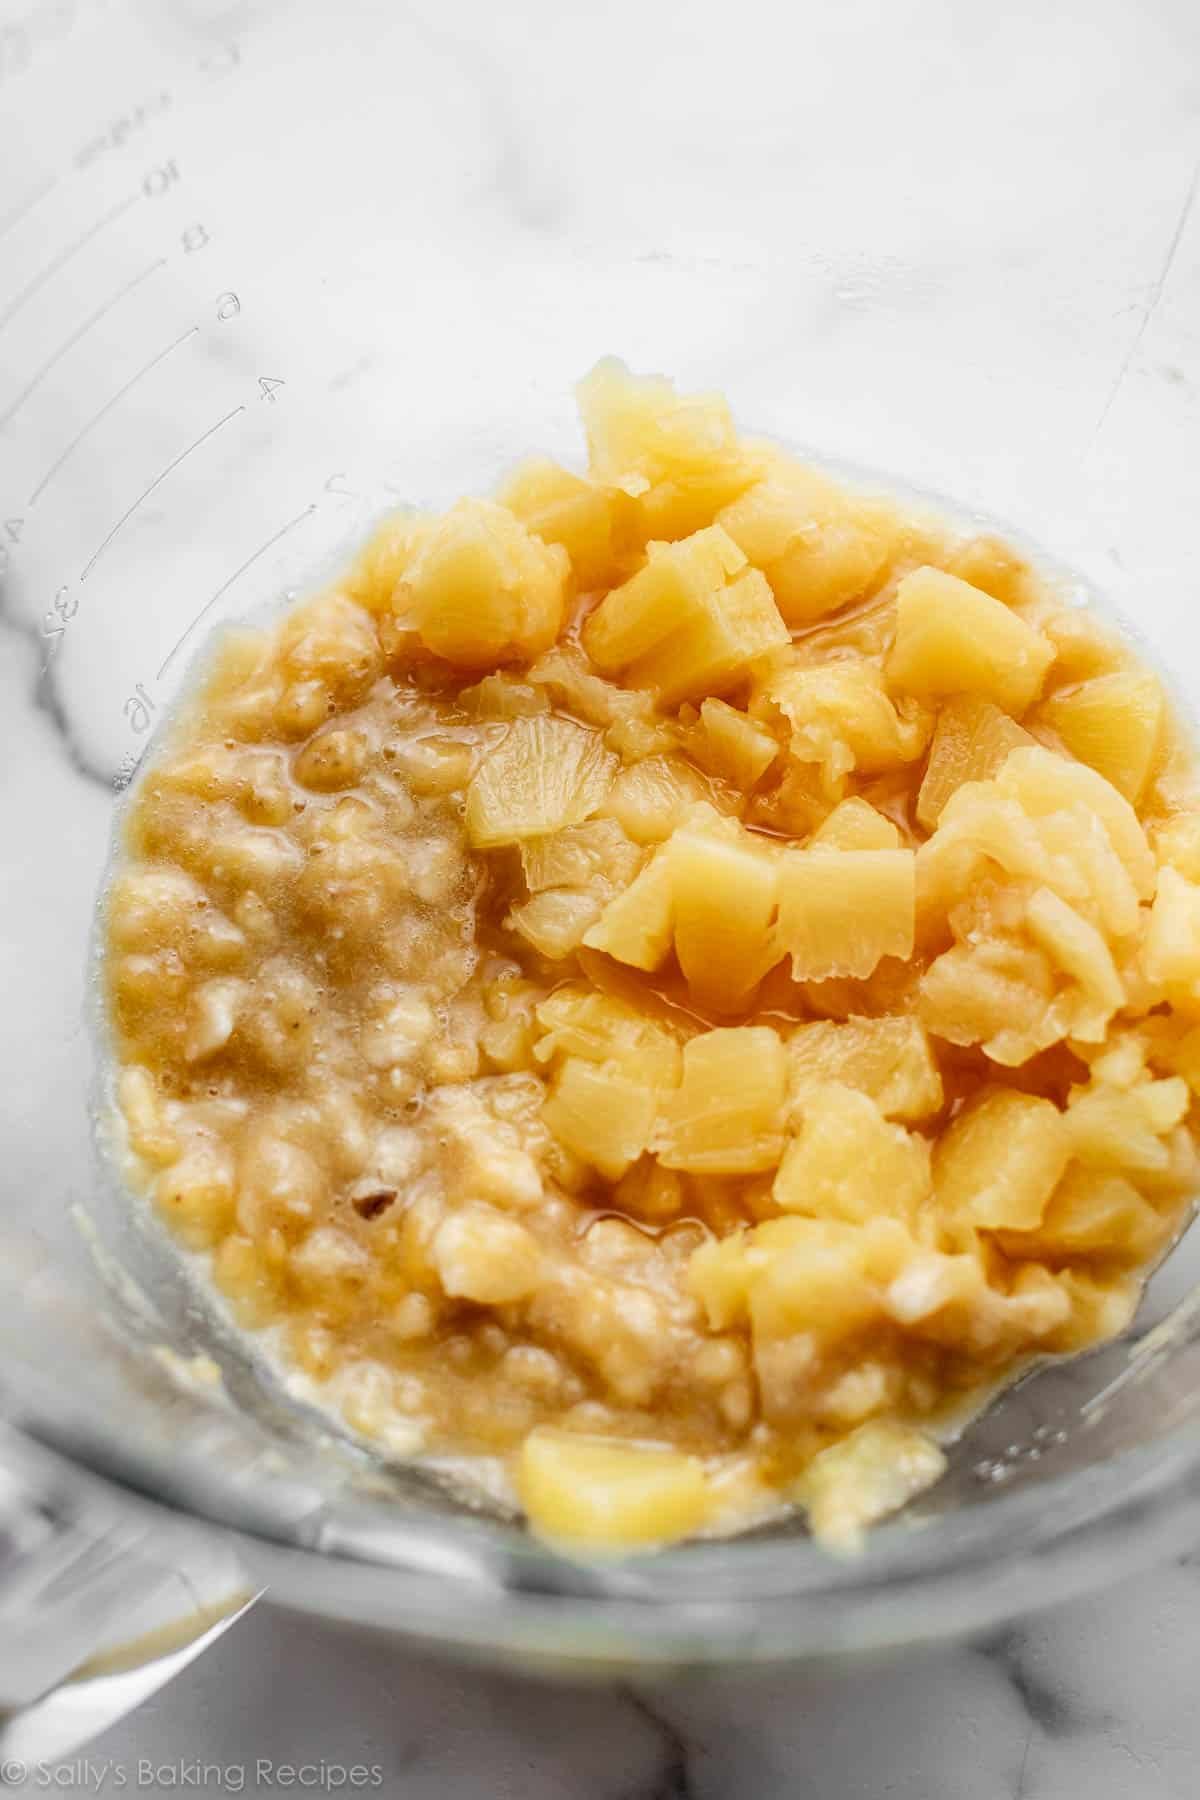 mashed banana and pineapple chunks in a glass bowl.